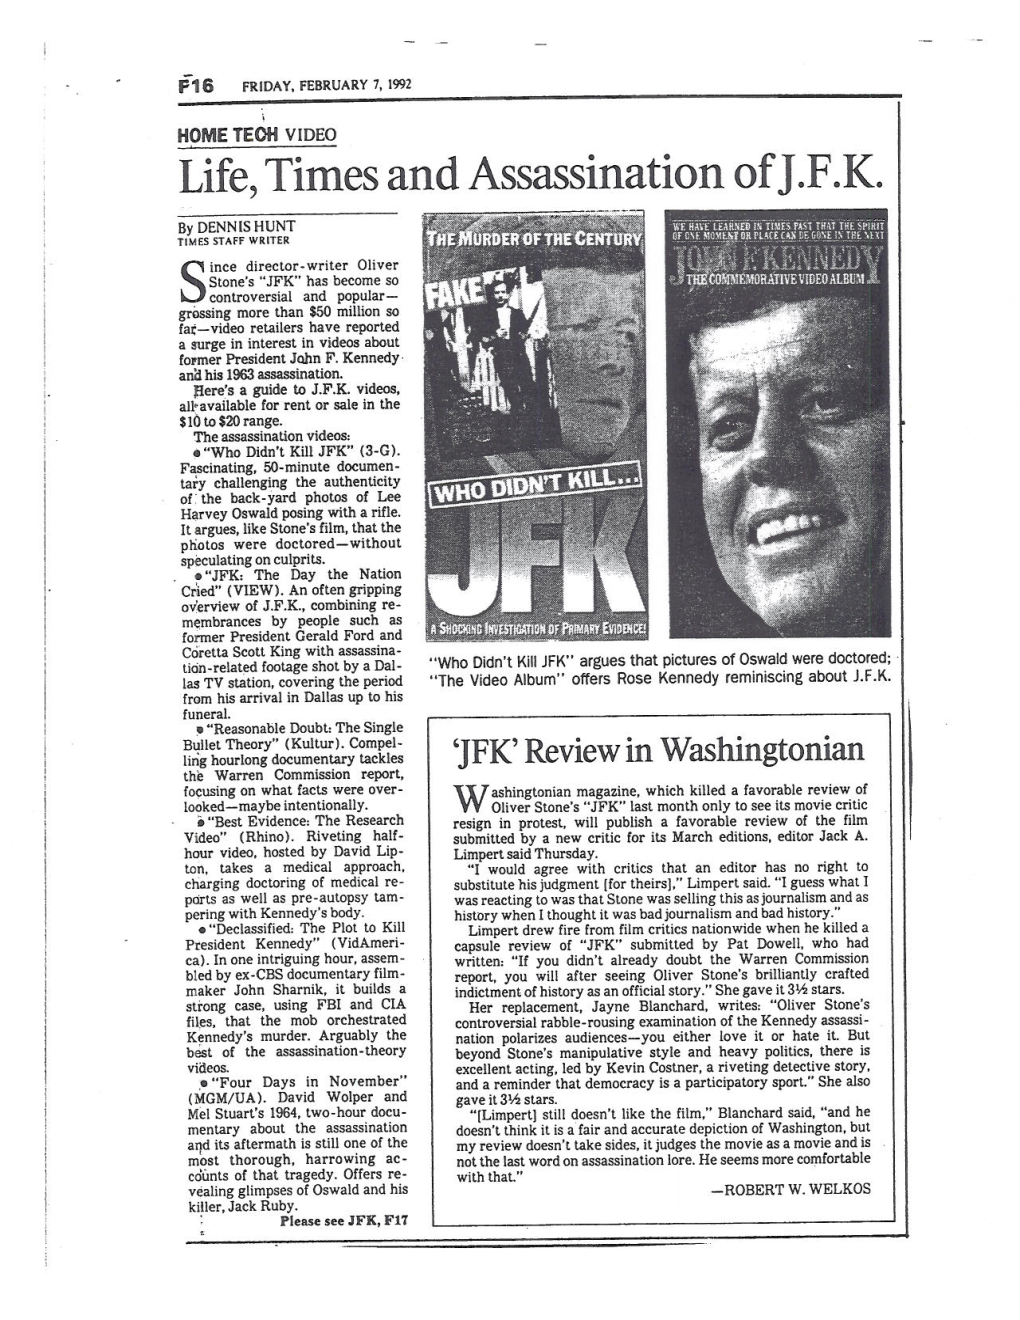 Life, Times and Assassination of J.F.K